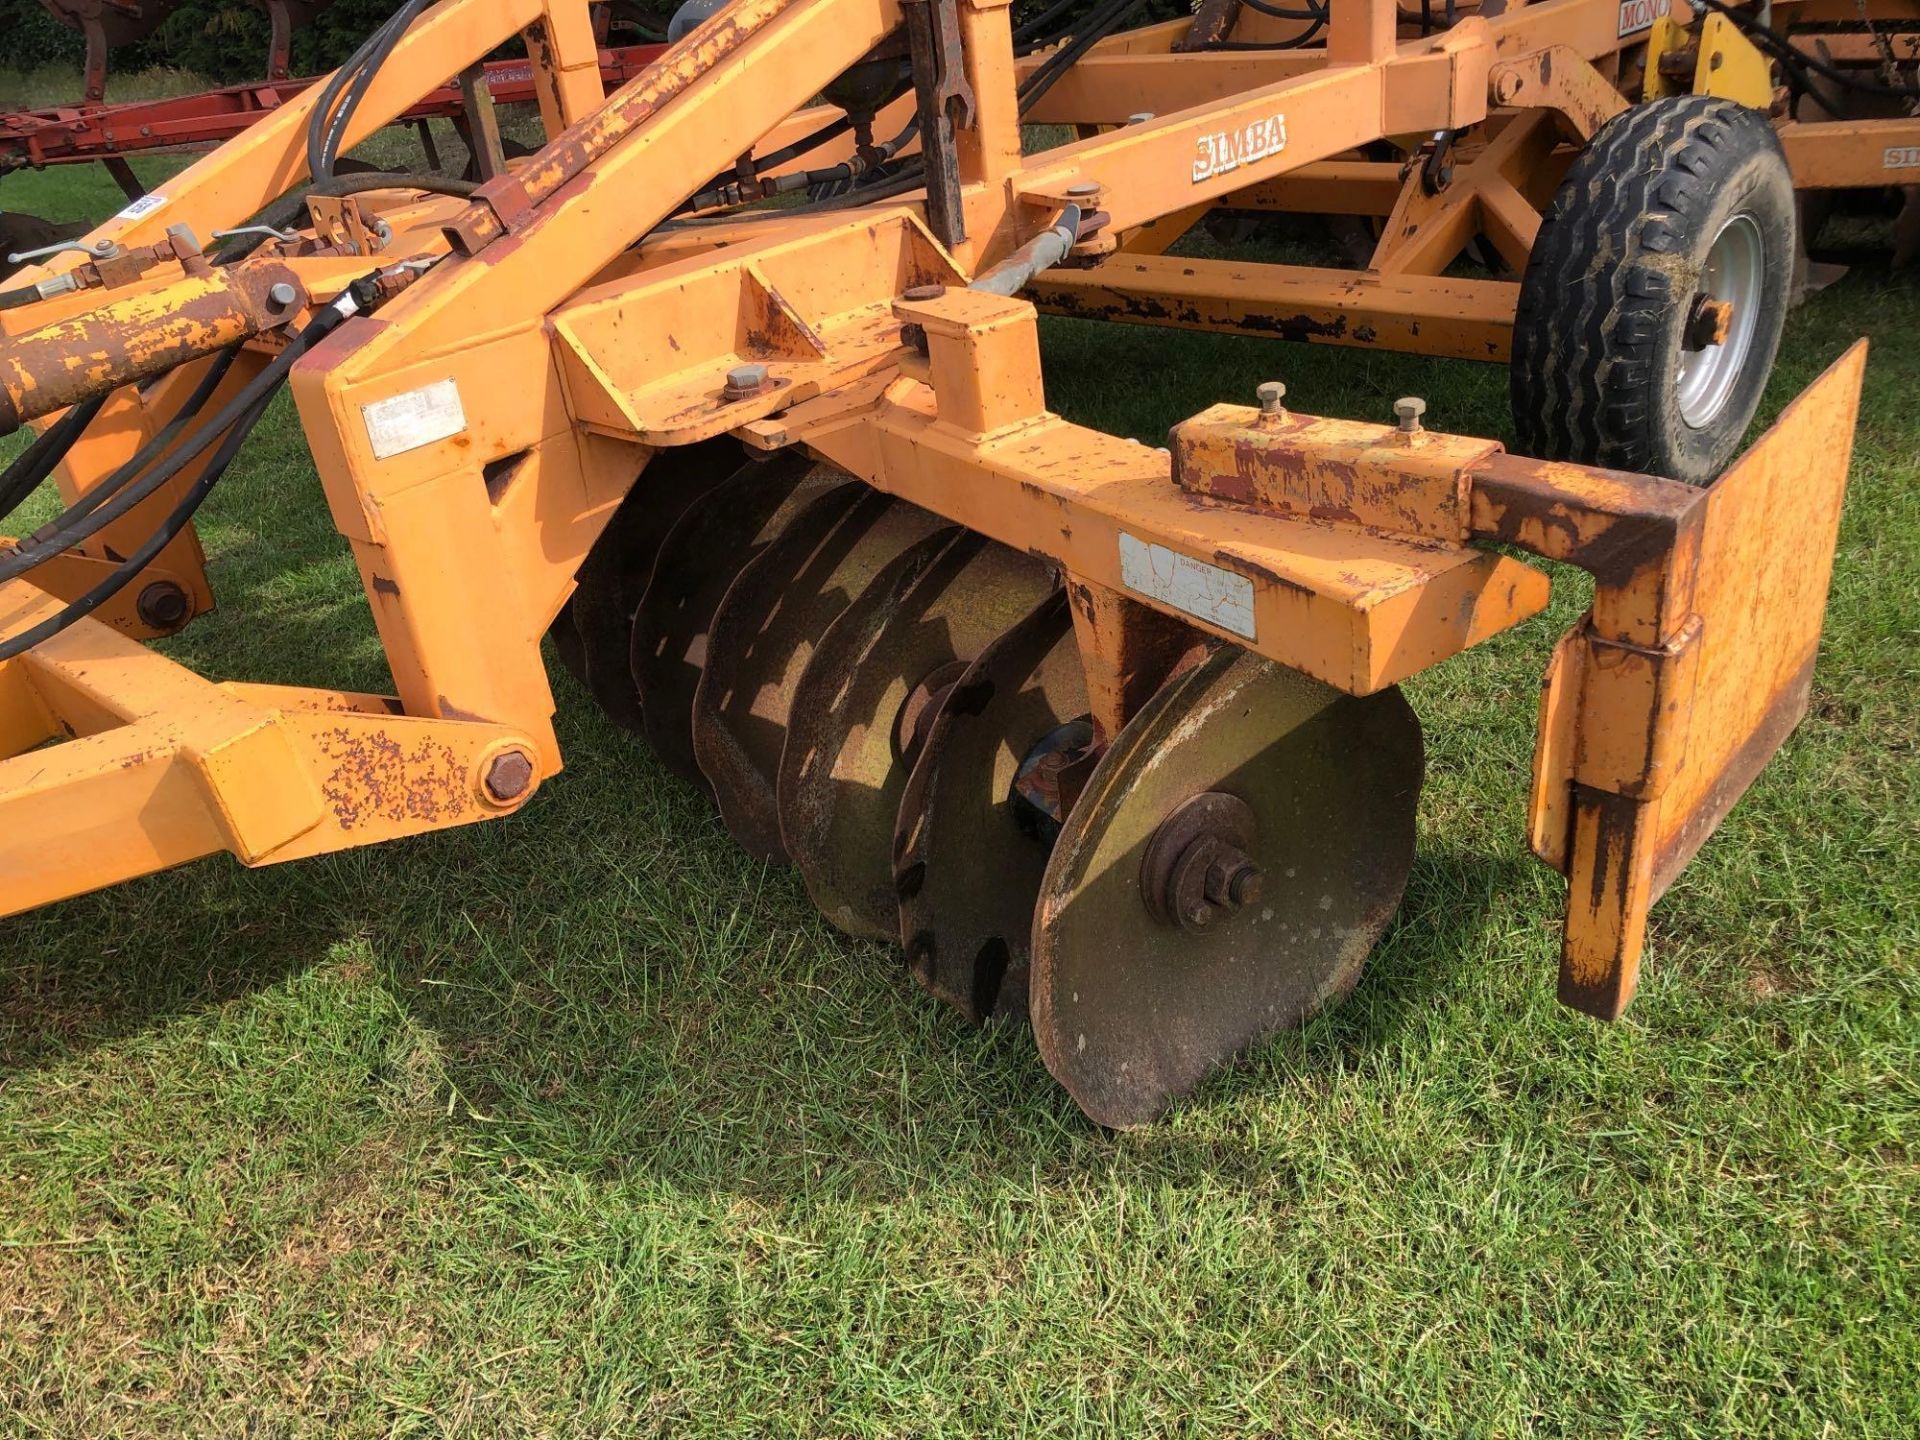 1996 Simba Mono trailed cultivator with front discs, 5 auto-reset subsoiler legs, rear discs and too - Image 4 of 12